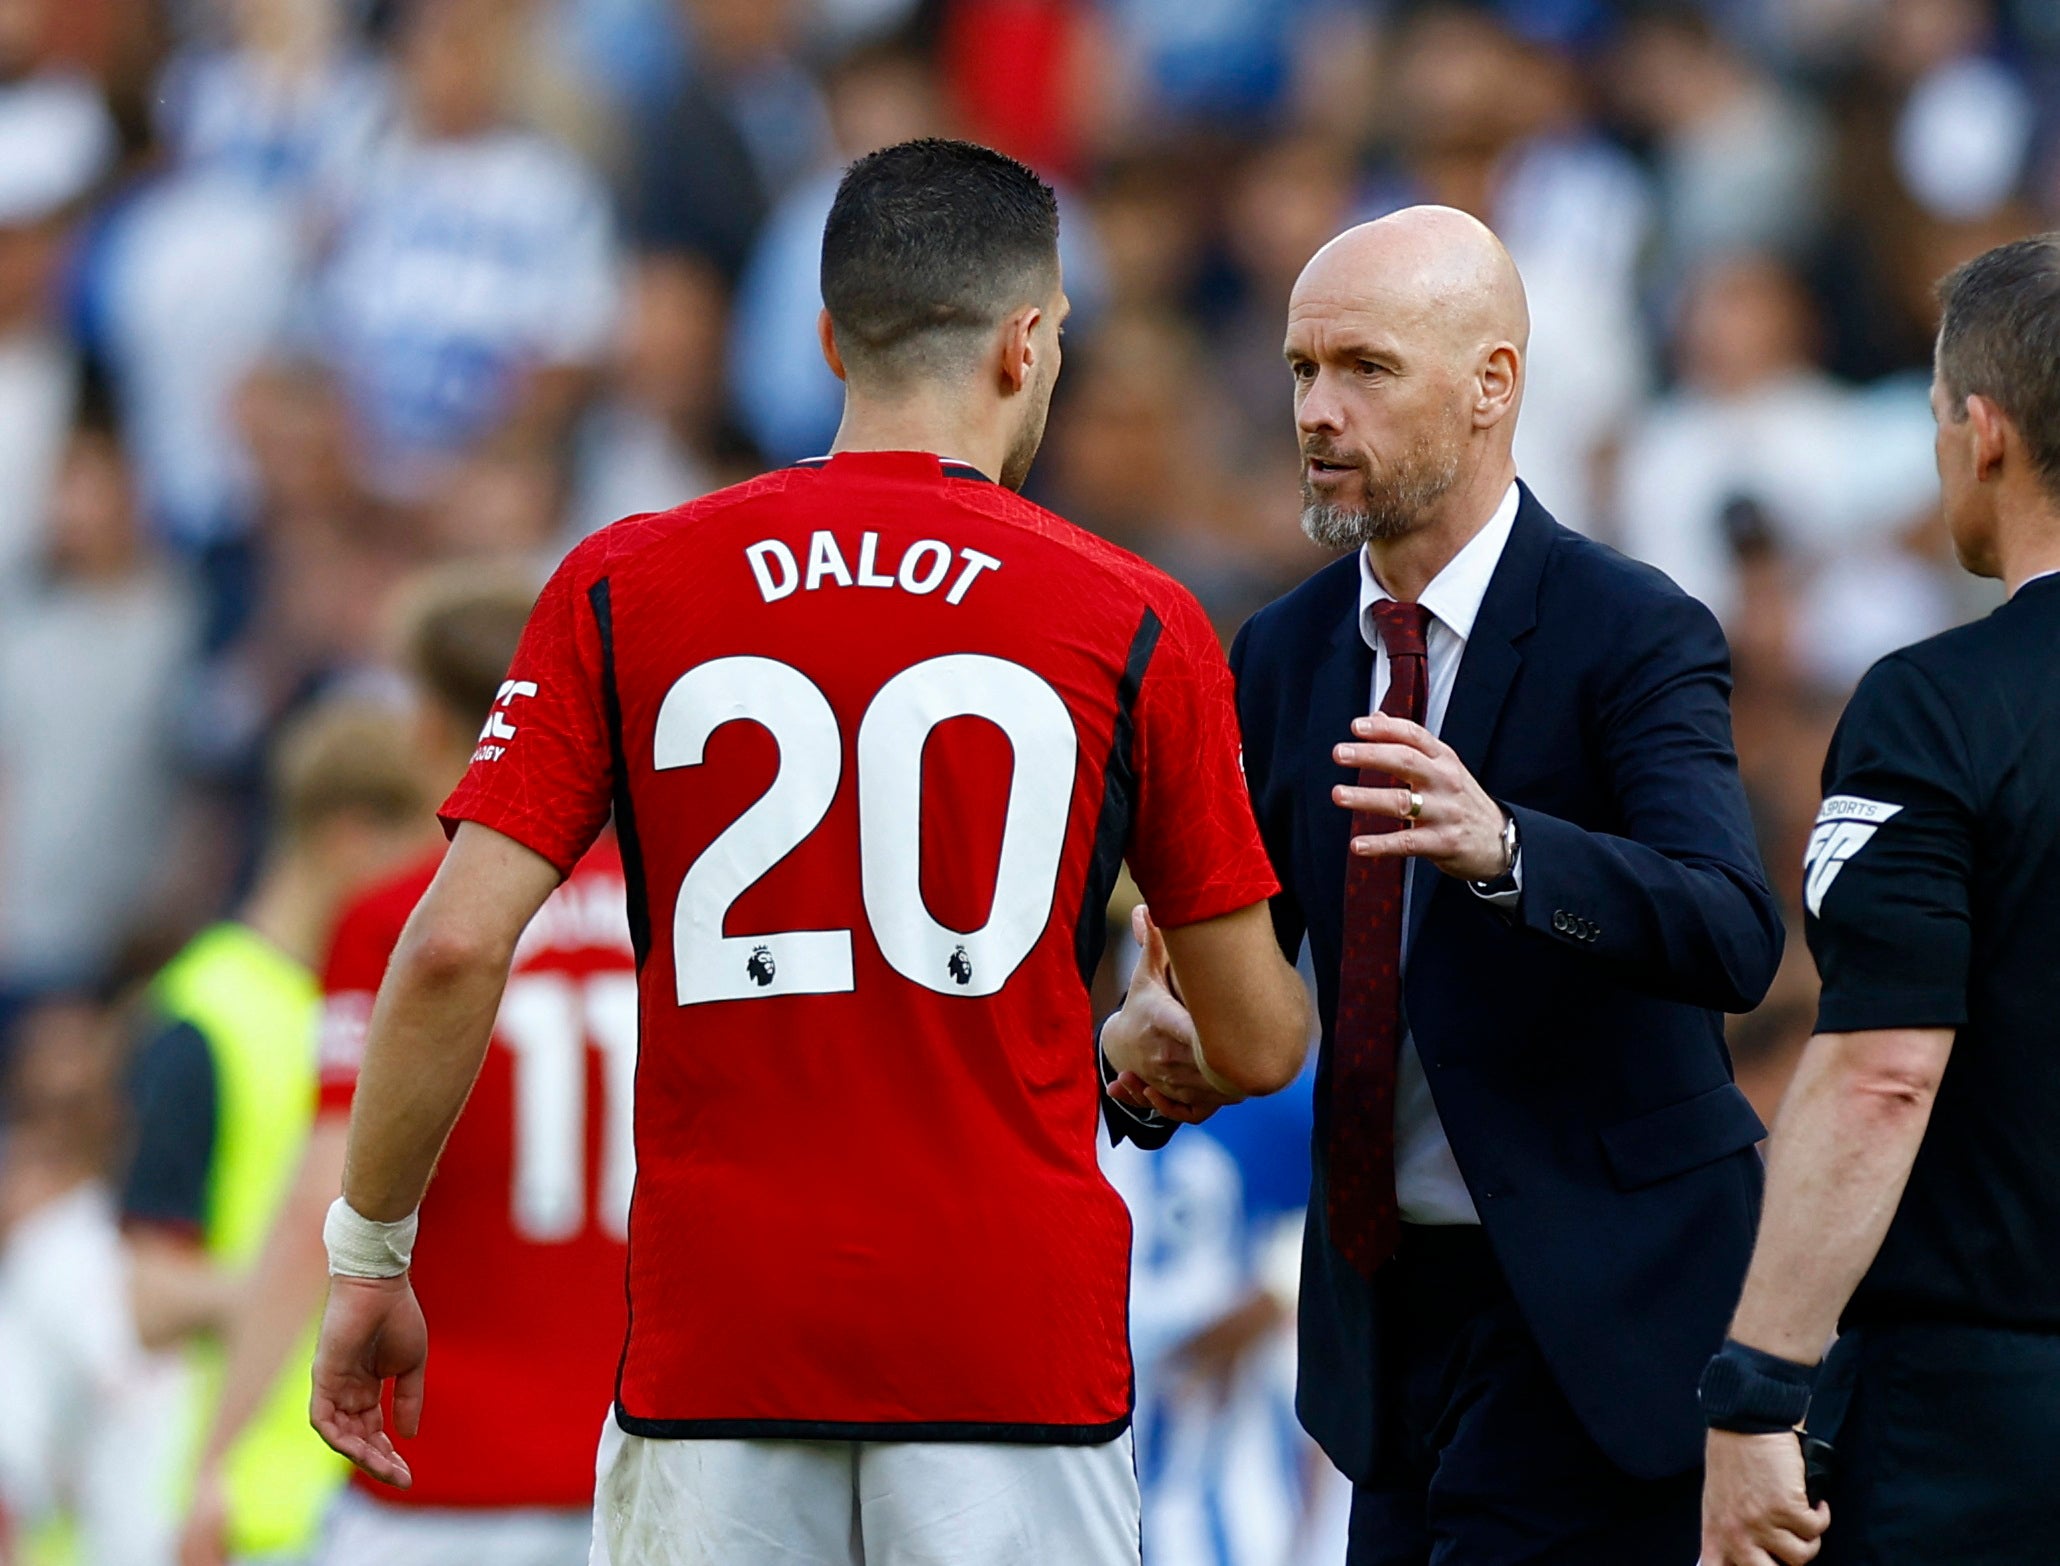 Dalot has become one of Erik ten Hag’s trusted players at Old Trafford this season